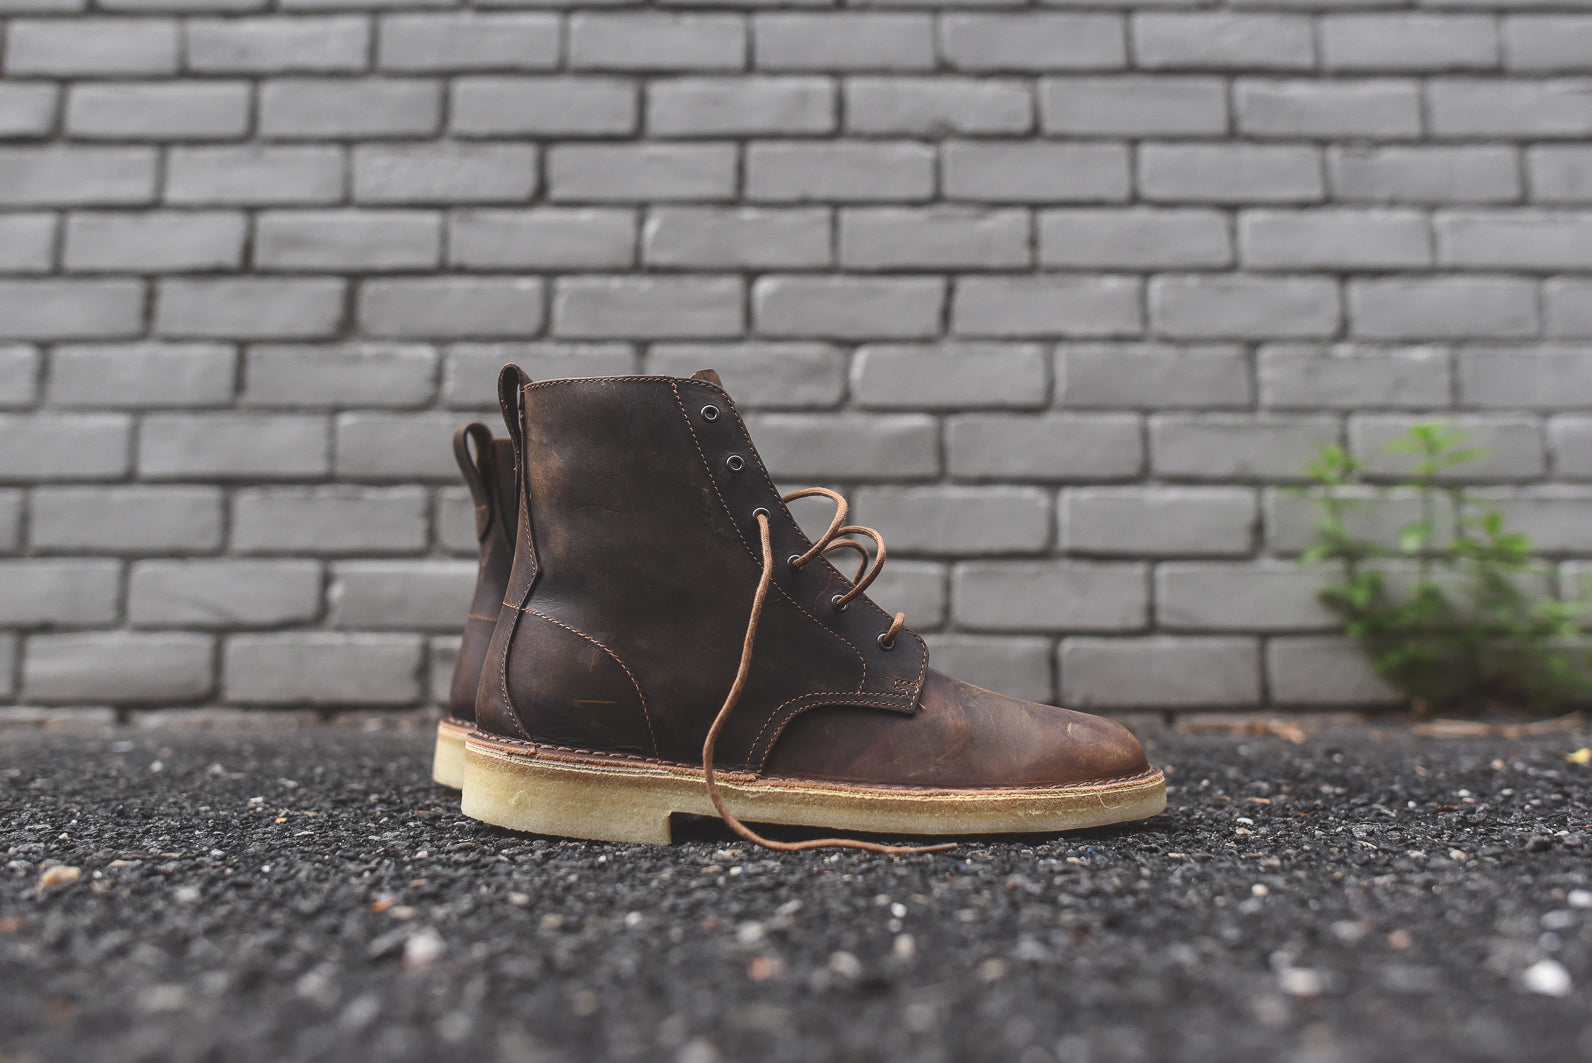 clarks shoes 2015 winter